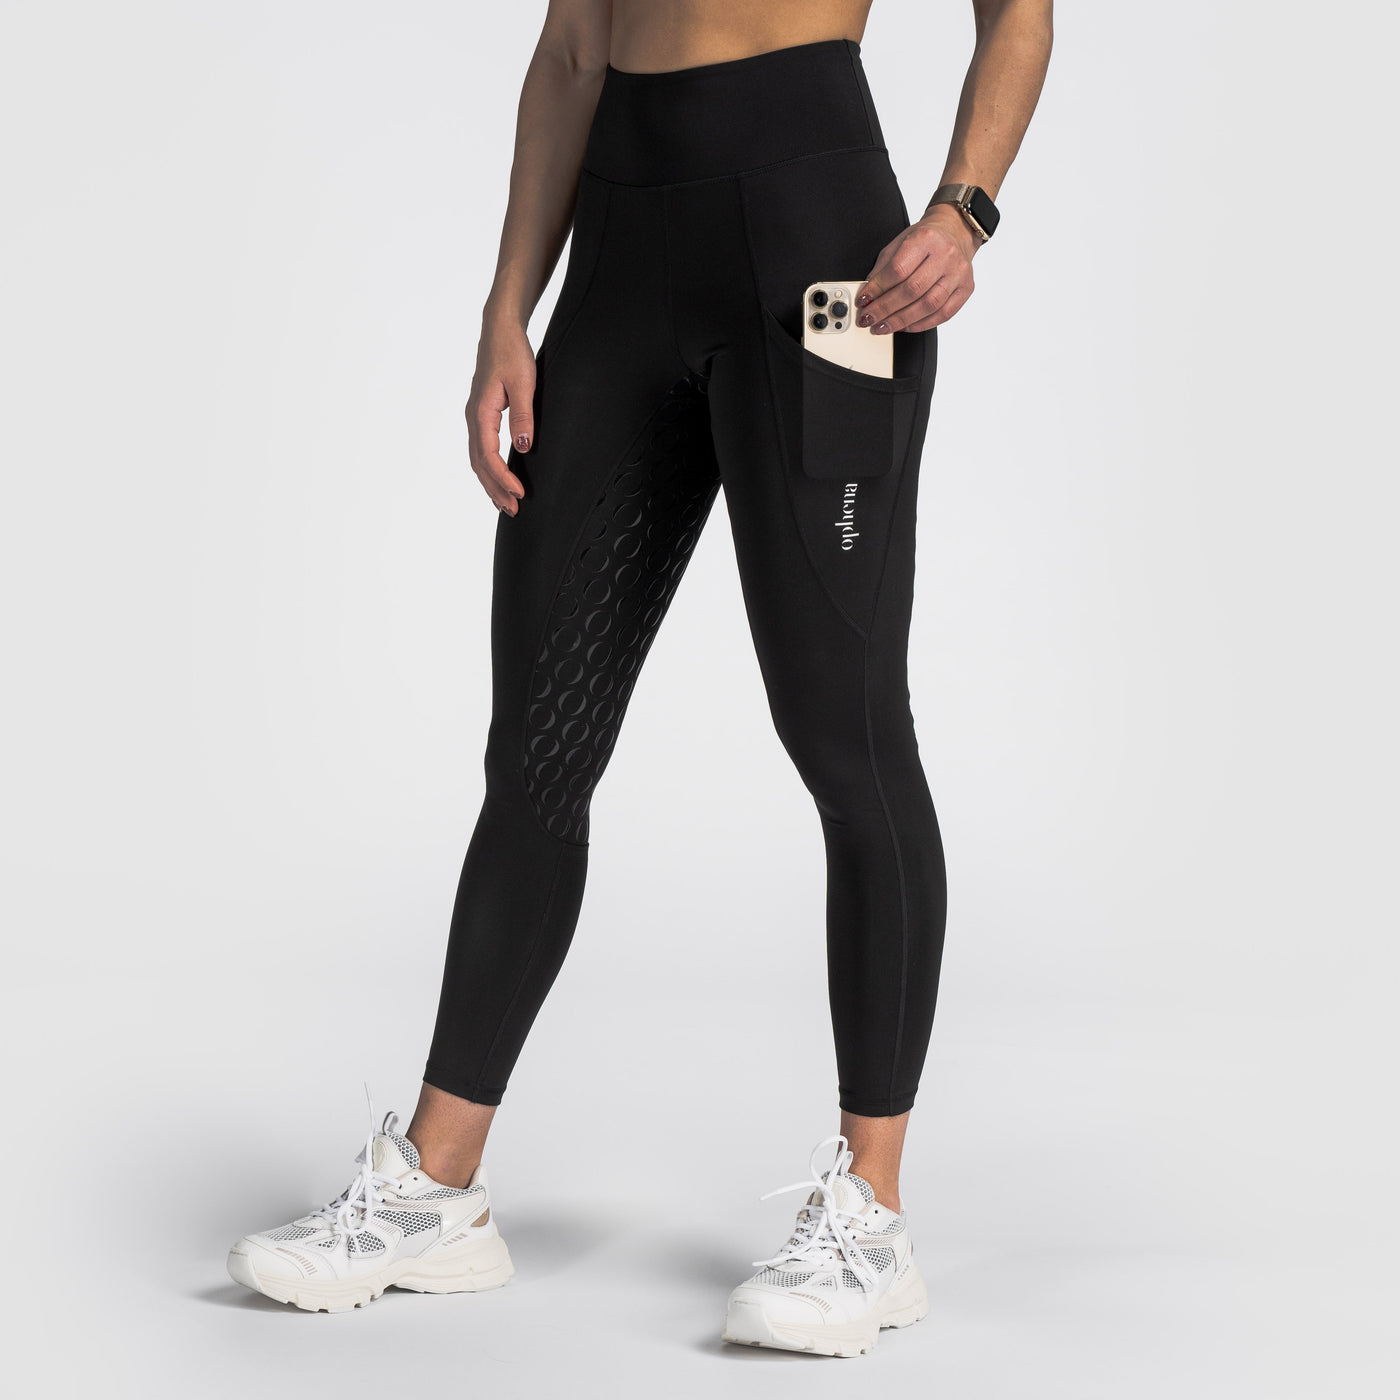 EQUITHÈME Riding Legging Tea Pull-On Silicon Knee Pads Black/Jeans -  Agradi.com